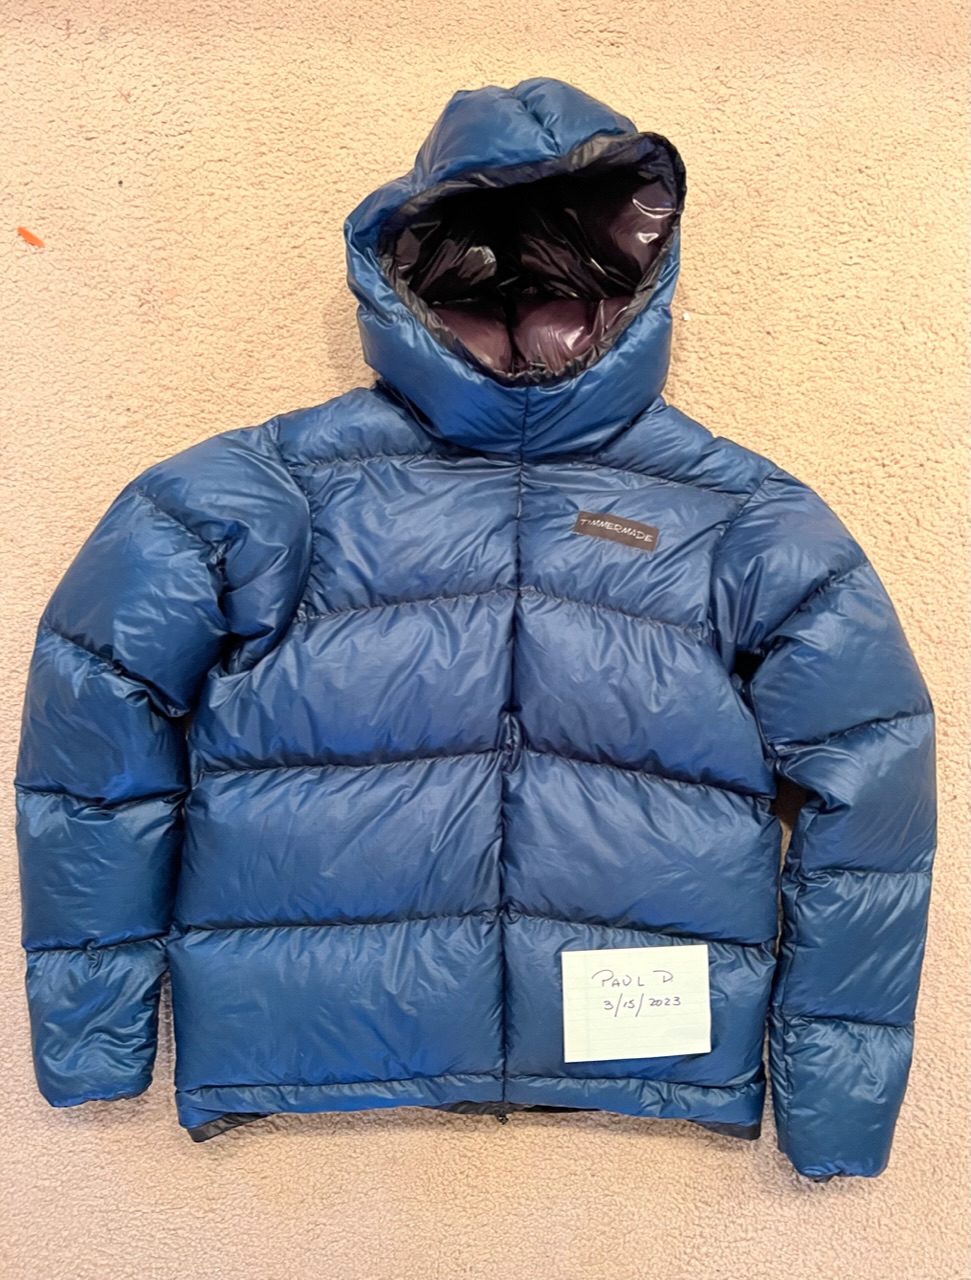 Timmermade SUL 1.5, Down Sweater, M, Blue $300 - Backpacking Light